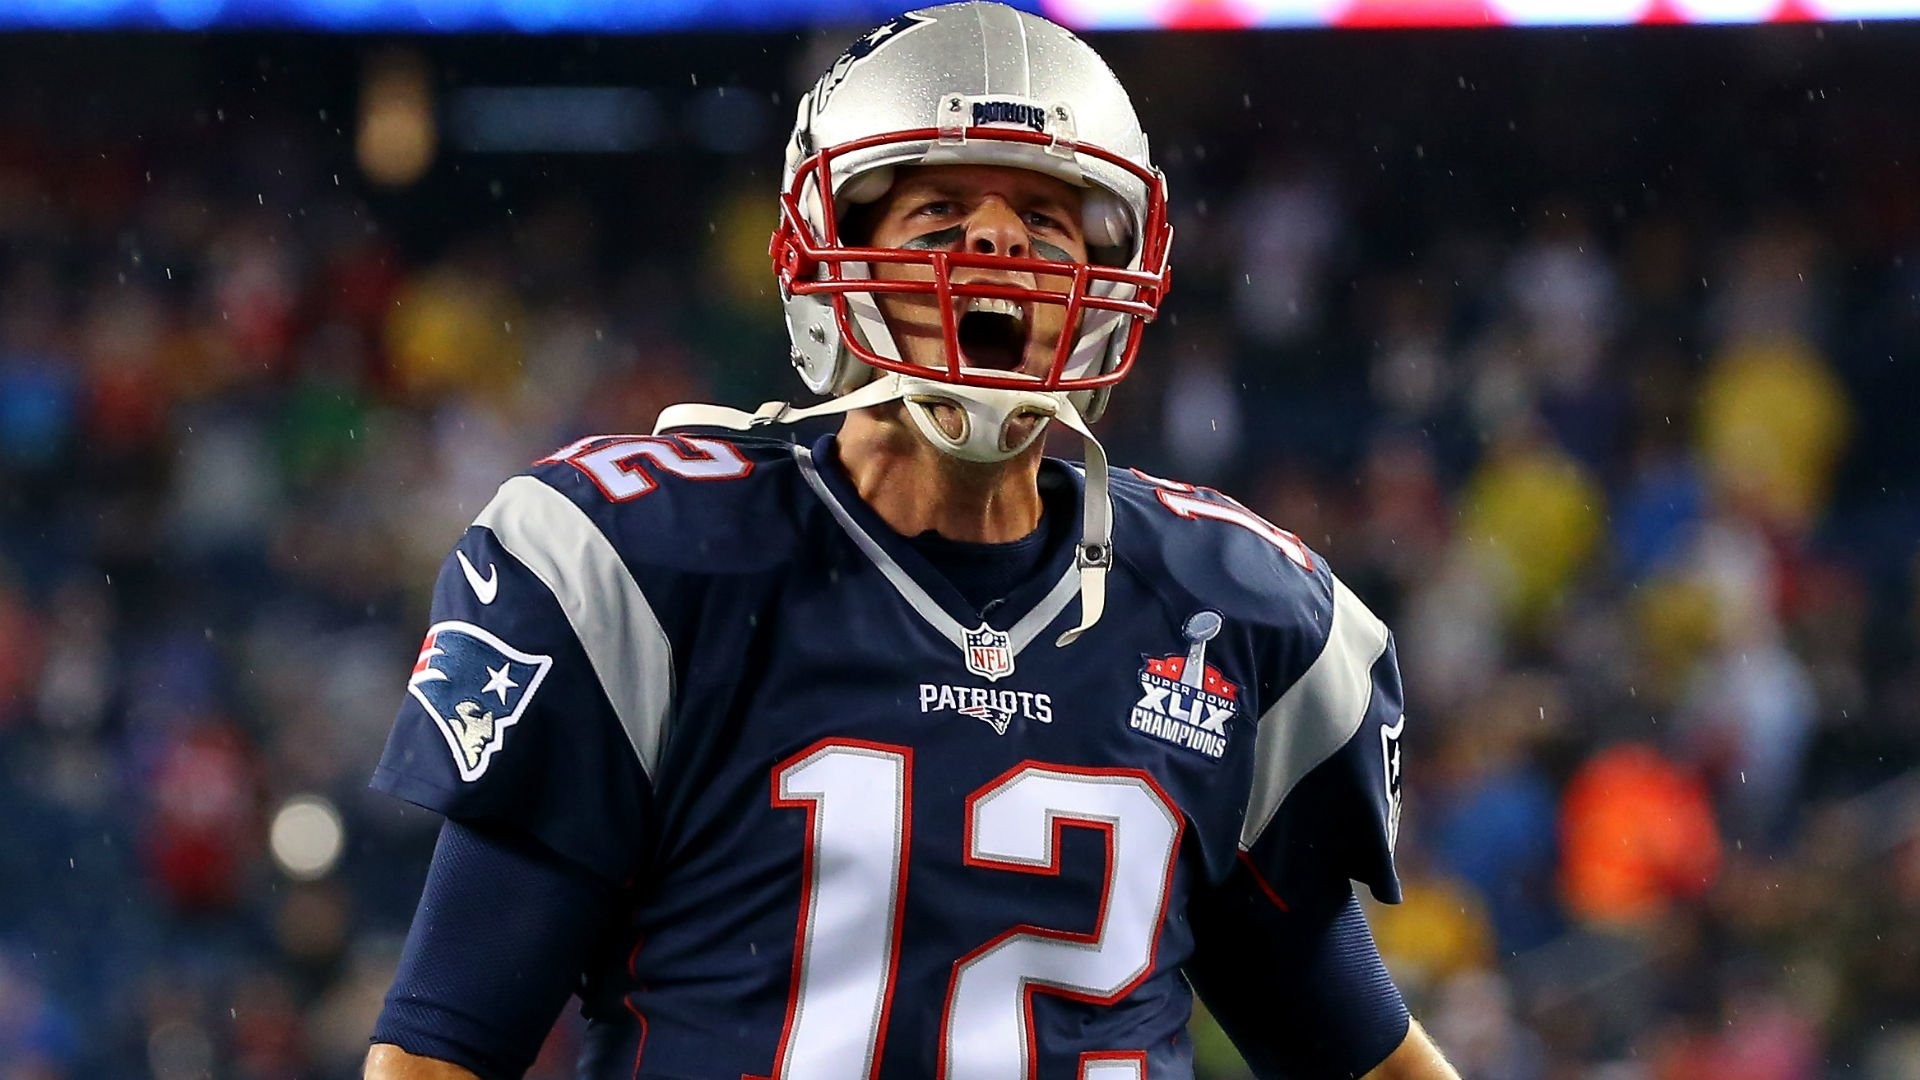 Tom Brady Goat Wallpaper with image resolution 1920x1080 pixel. You can use this wallpaper as background for your desktop Computer Screensavers, Android or iPhone smartphones